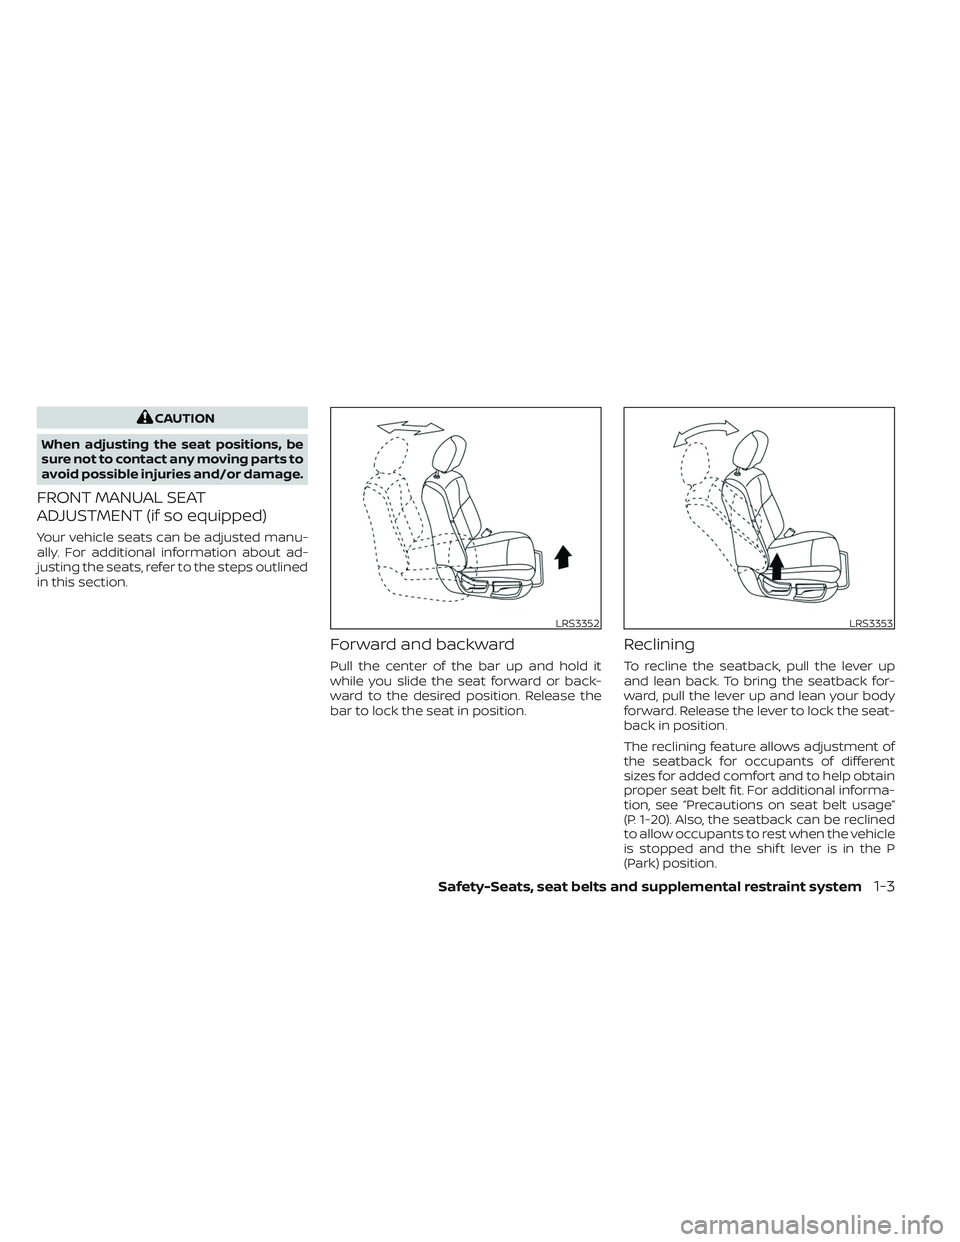 NISSAN PATHFINDER 2022  Owner´s Manual CAUTION
When adjusting the seat positions, be
sure not to contact any moving parts to
avoid possible injuries and/or damage.
FRONT MANUAL SEAT
ADJUSTMENT (if so equipped)
Your vehicle seats can be adj